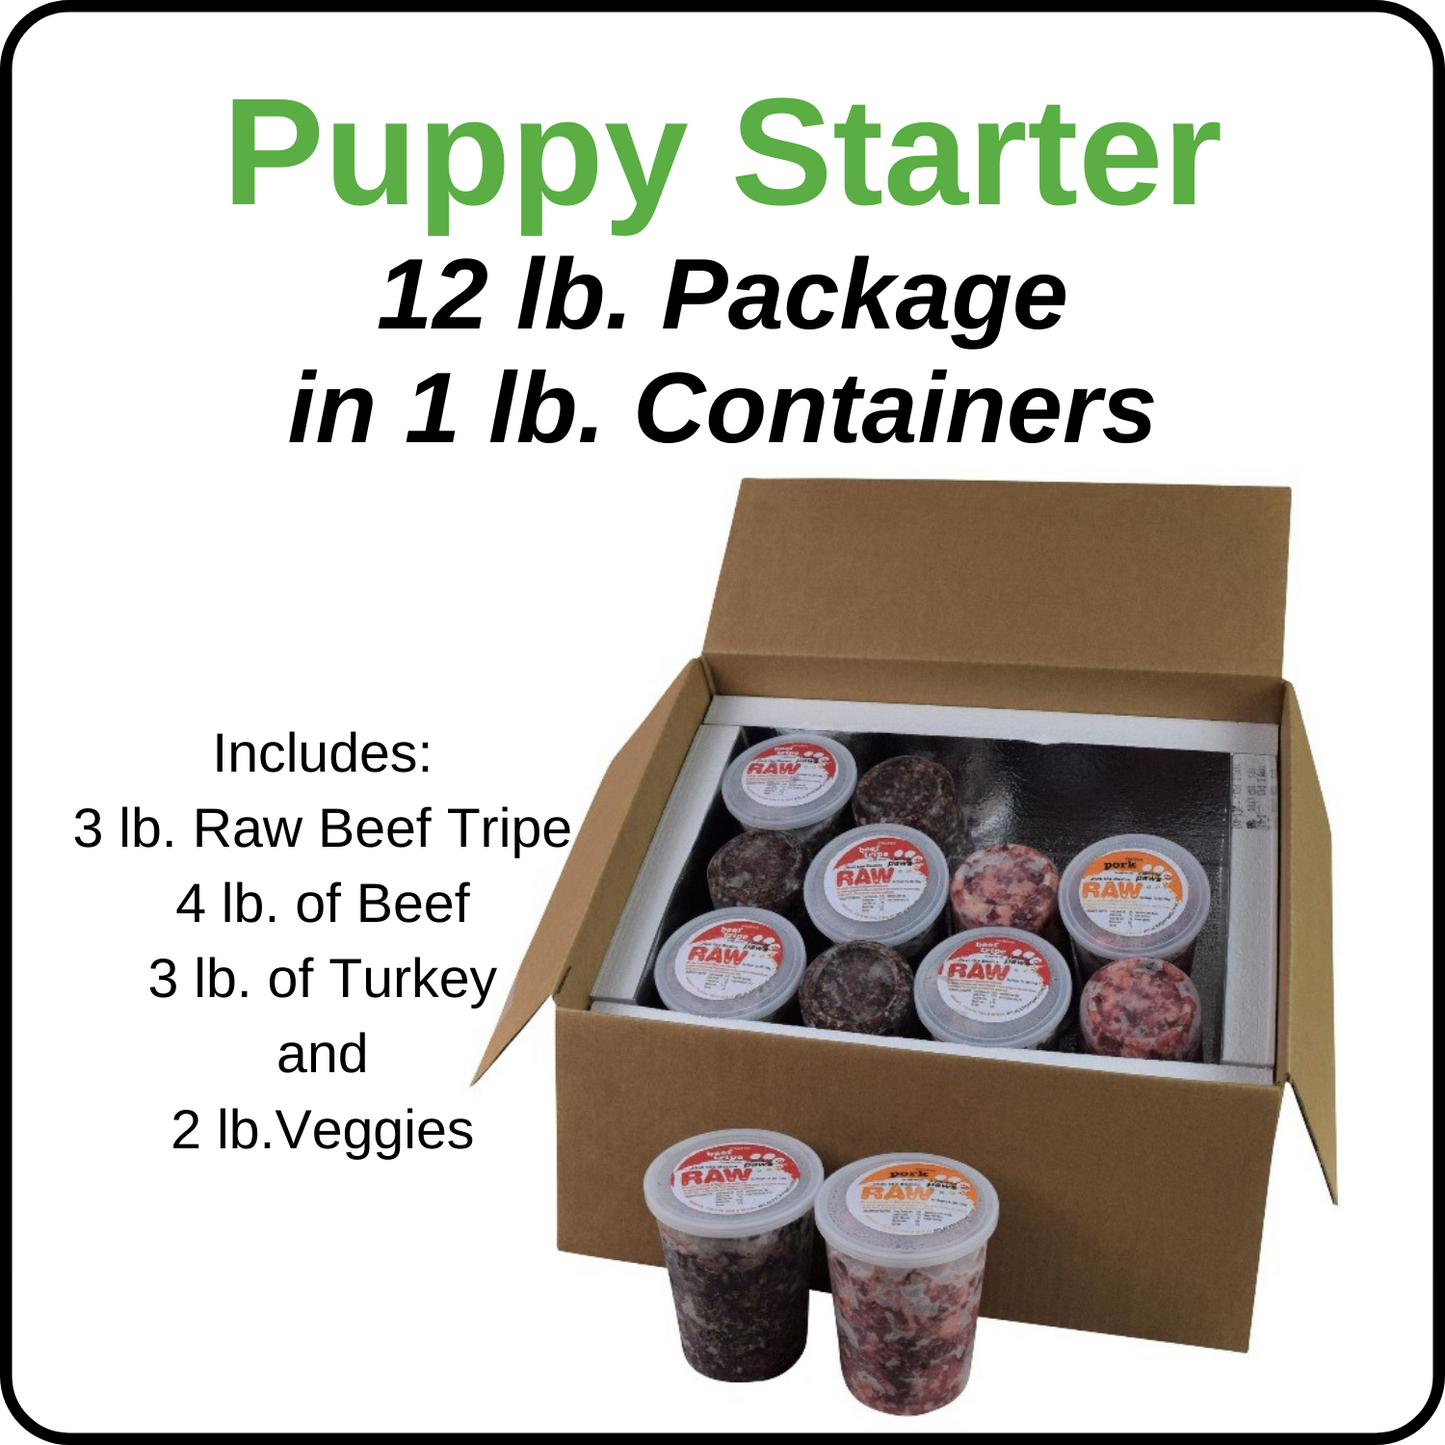 Puppy Starter Package 12 lb.